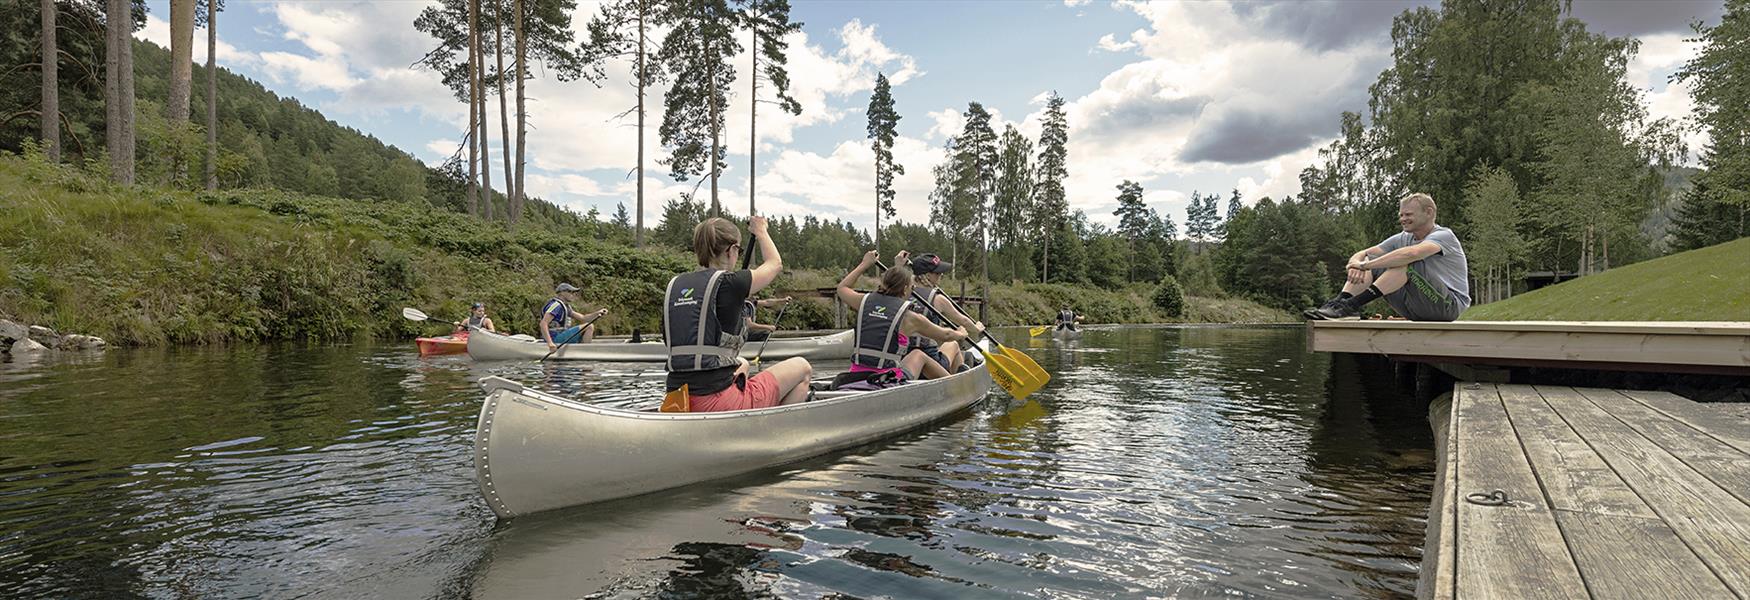 Canoeing on the Telemark Canal